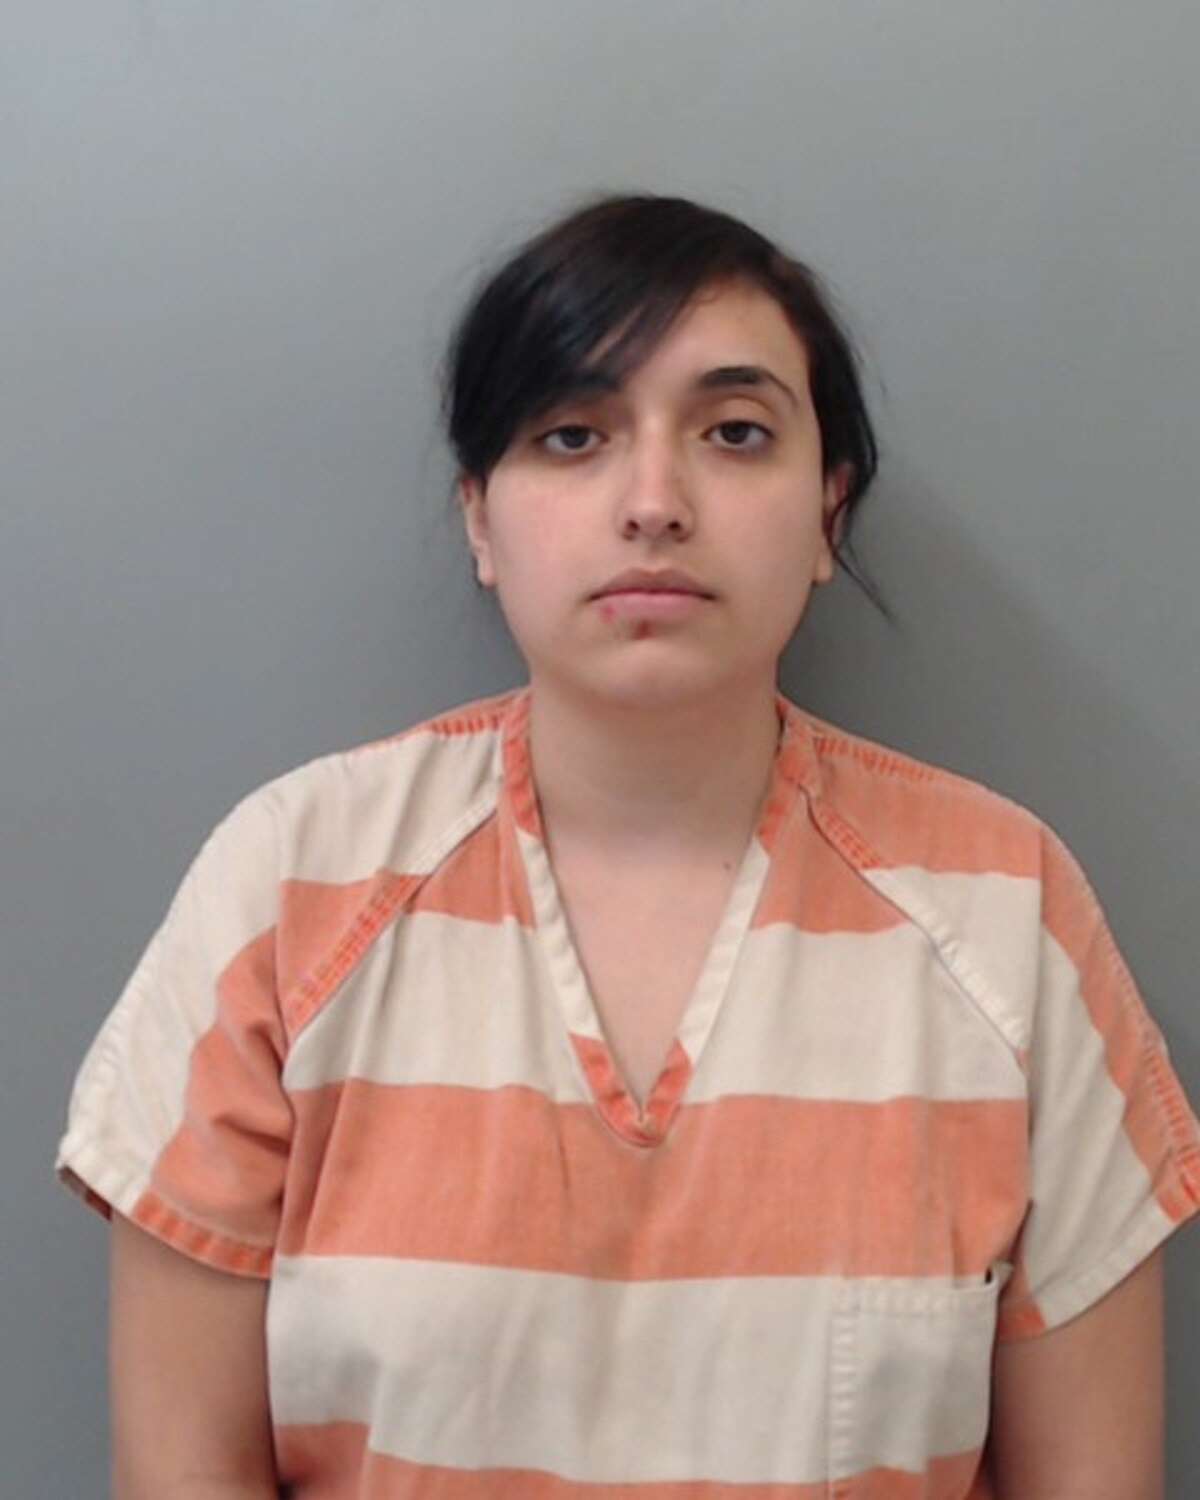 Brittney Marie Rodriguez, 20, was served with an arrest warrant and charged with assault.